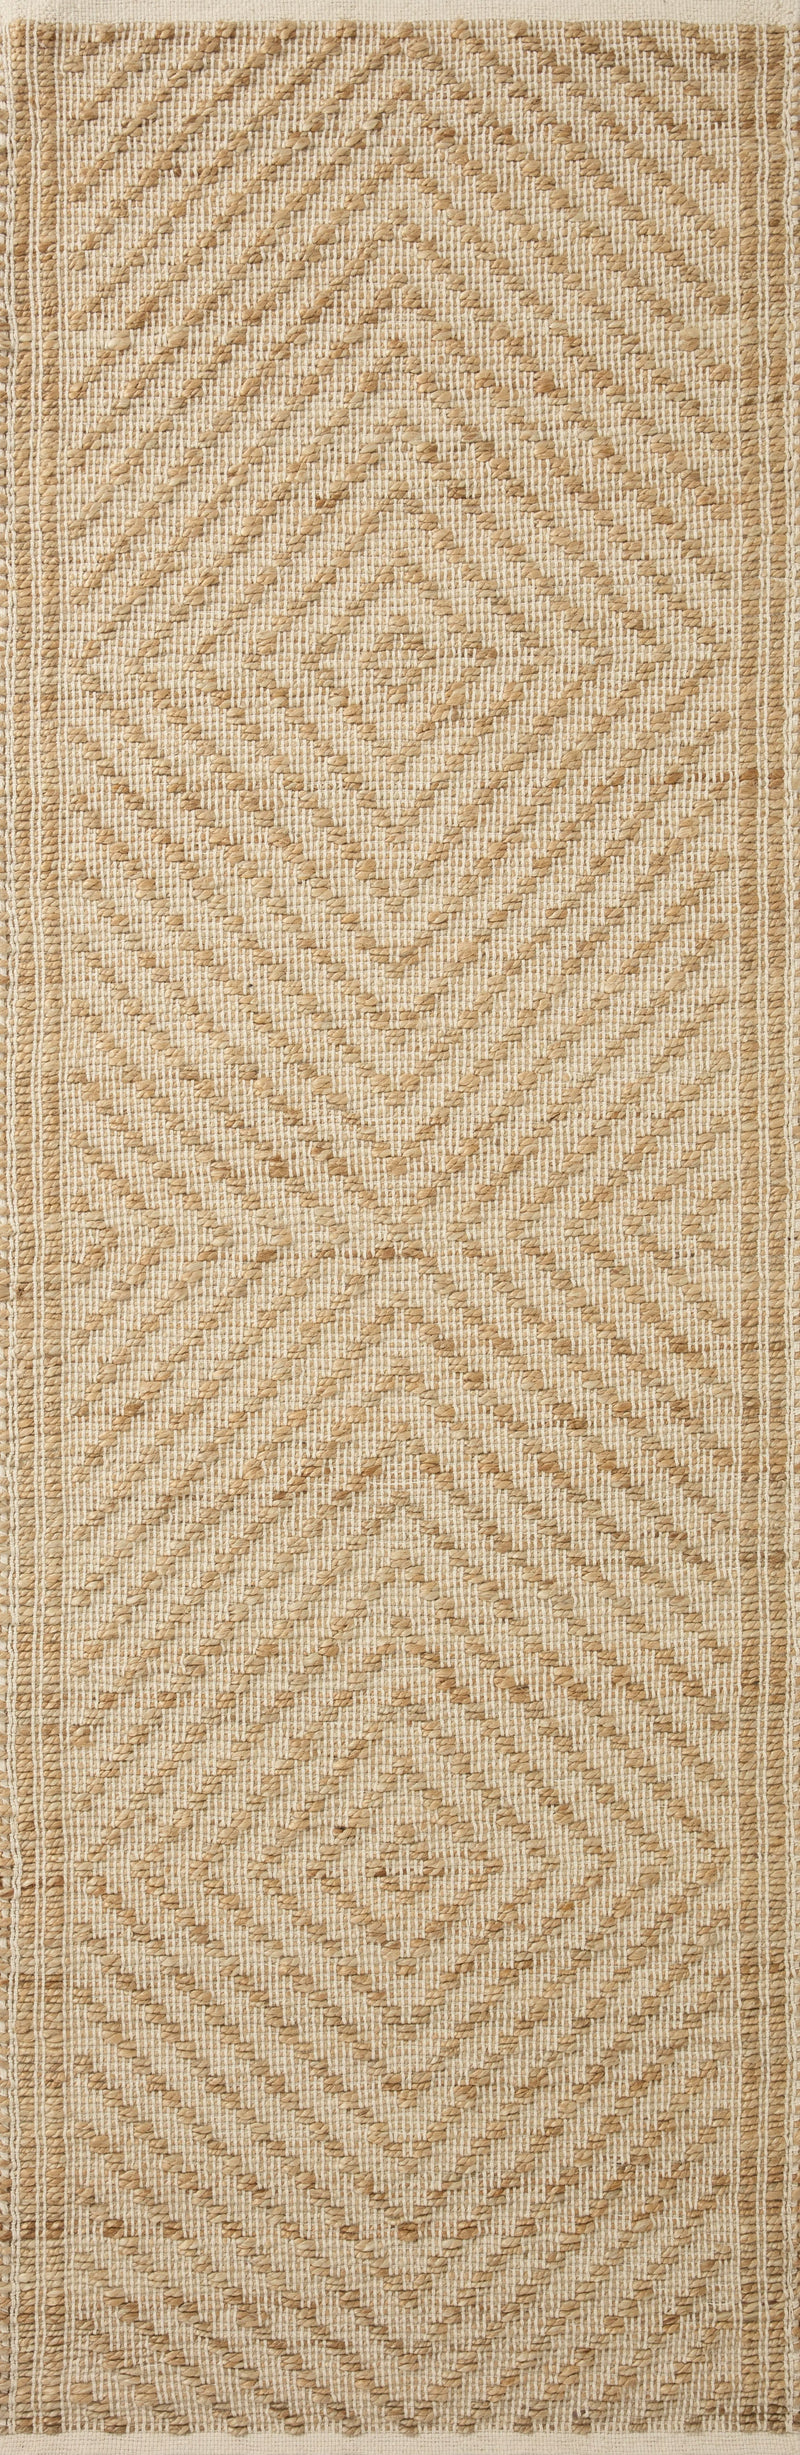 media image for colton hand woven natural ivory rug by angela rose x loloi colocon 04naiv2030 2 272